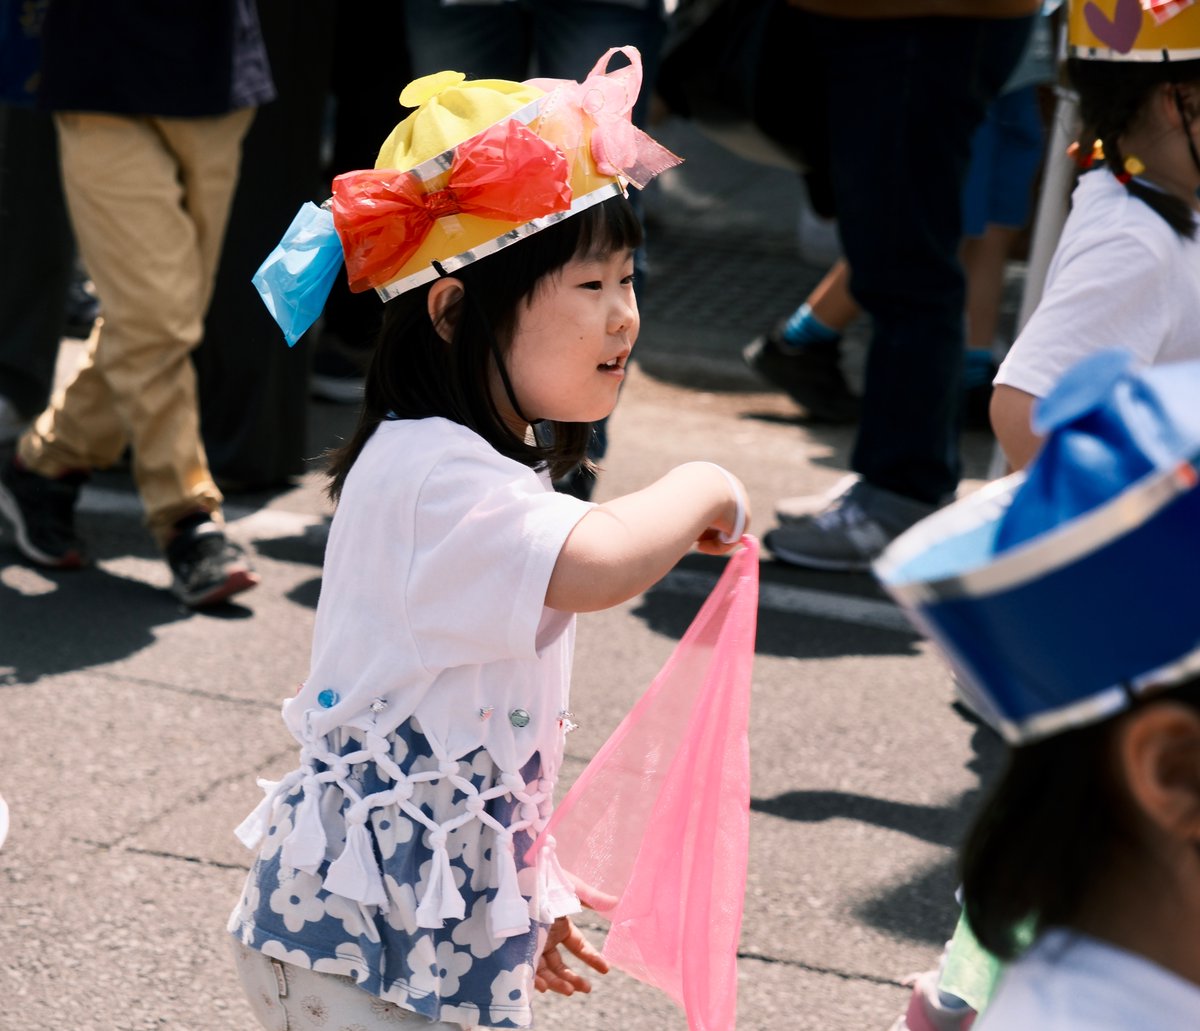 Another dumb idea. Japan's estimated child population shrank for the 43rd consecutive year to a new record low, The Population Strategy Council, a group of self-called 'experts' such as the Chairman of Nippon Steel (well know manufacturers of children) recently released…Short🧵